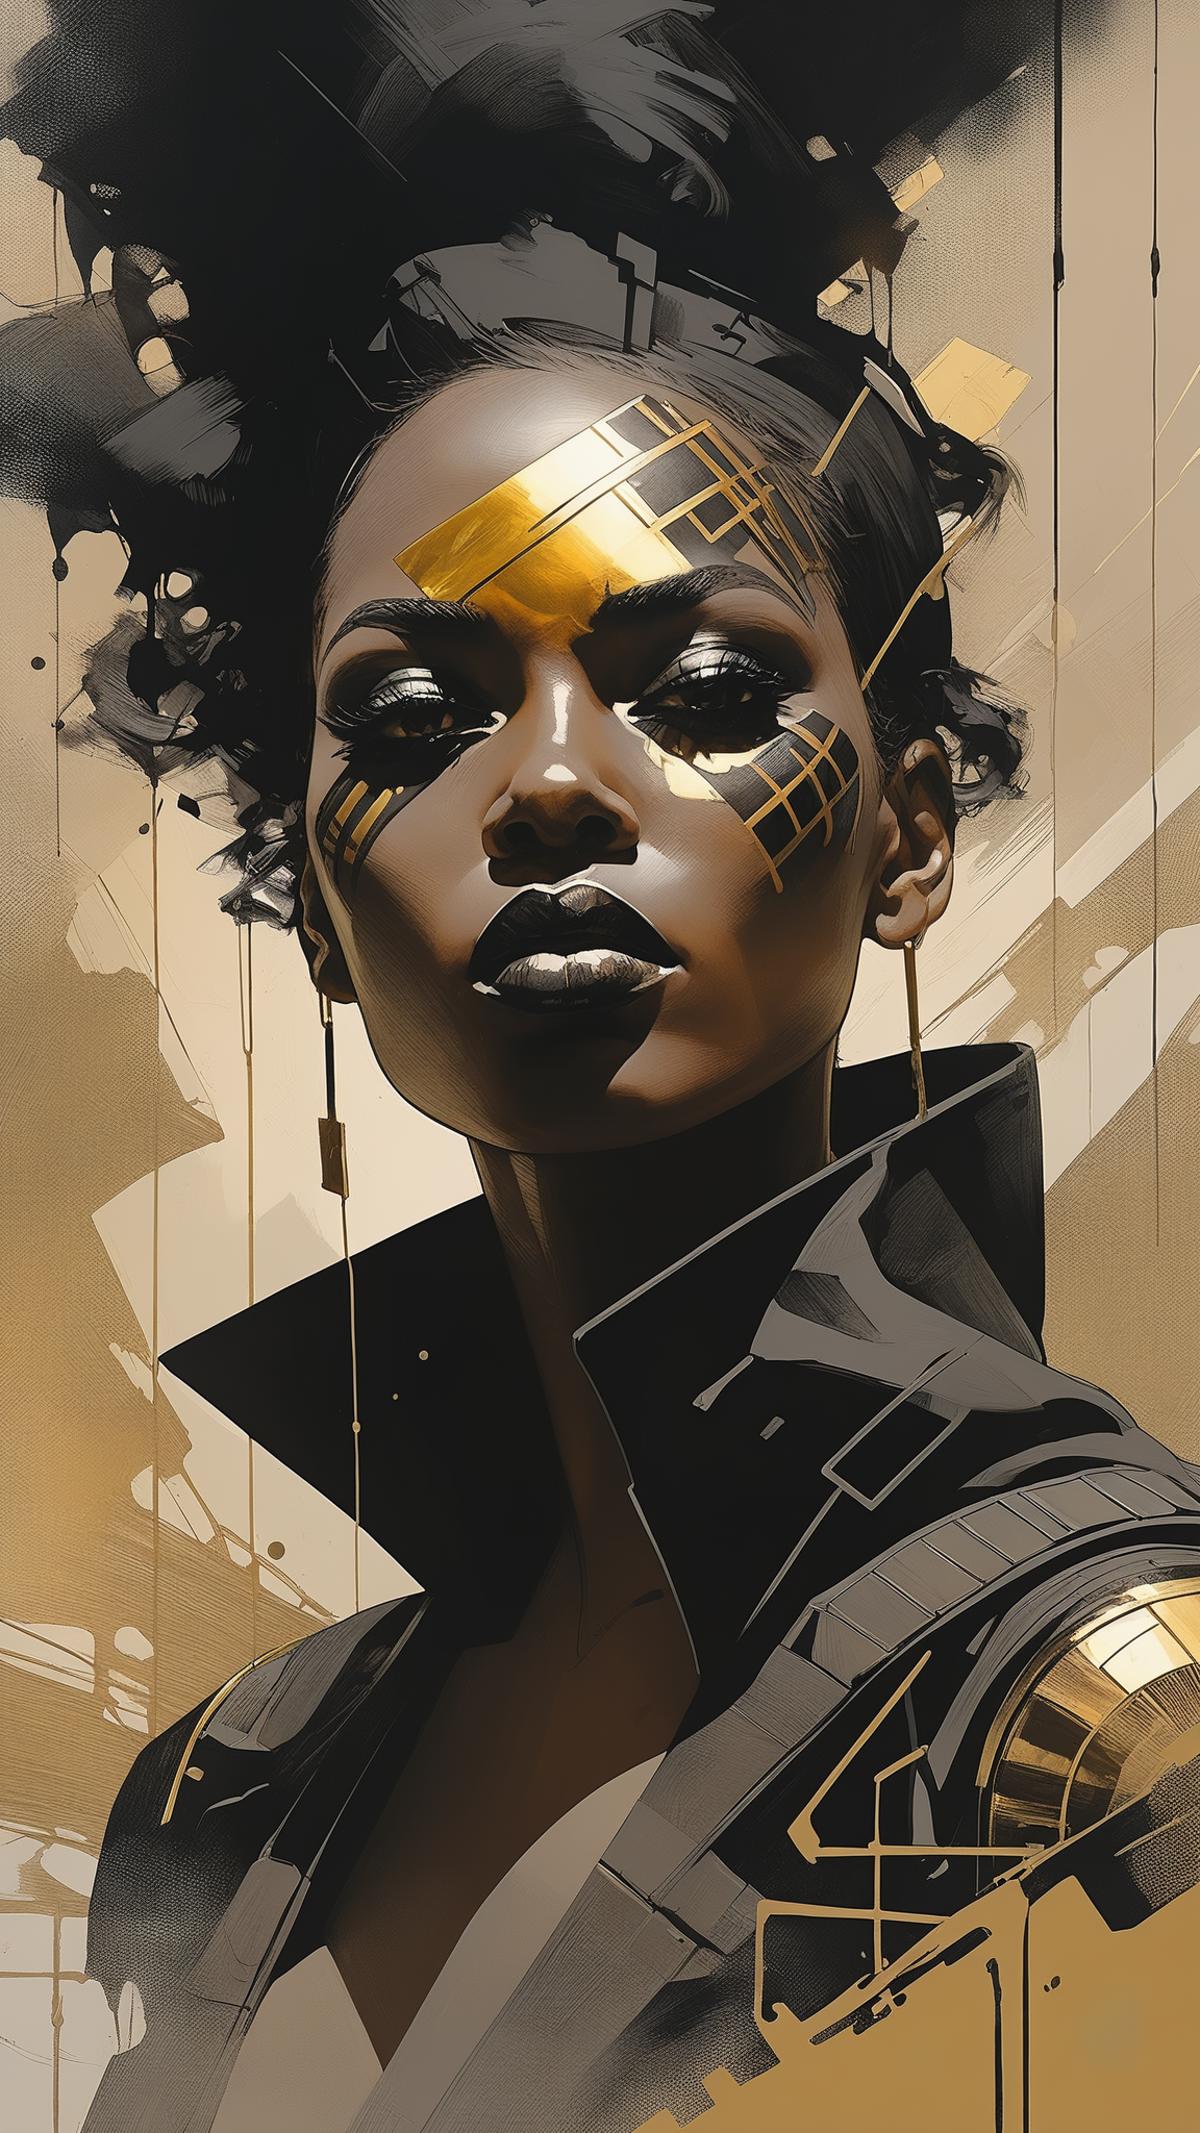 "African Woman with Gold Painted Face and Black Jacket"